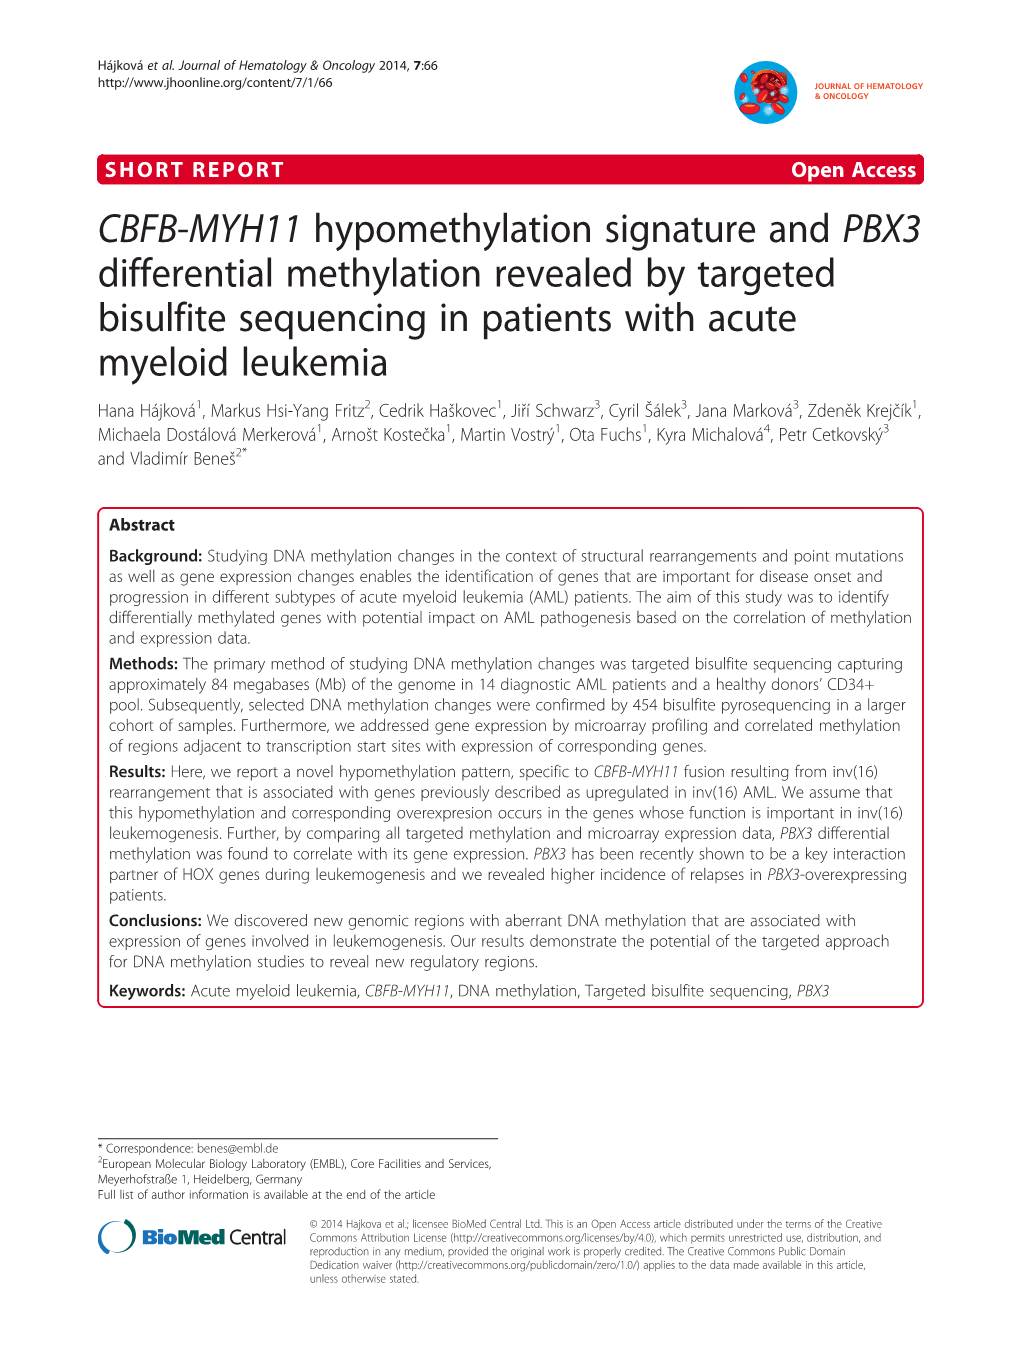 CBFB-MYH11 Hypomethylation Signature and PBX3 Differential Methylation Revealed by Targeted Bisulfite Sequencing in Patients